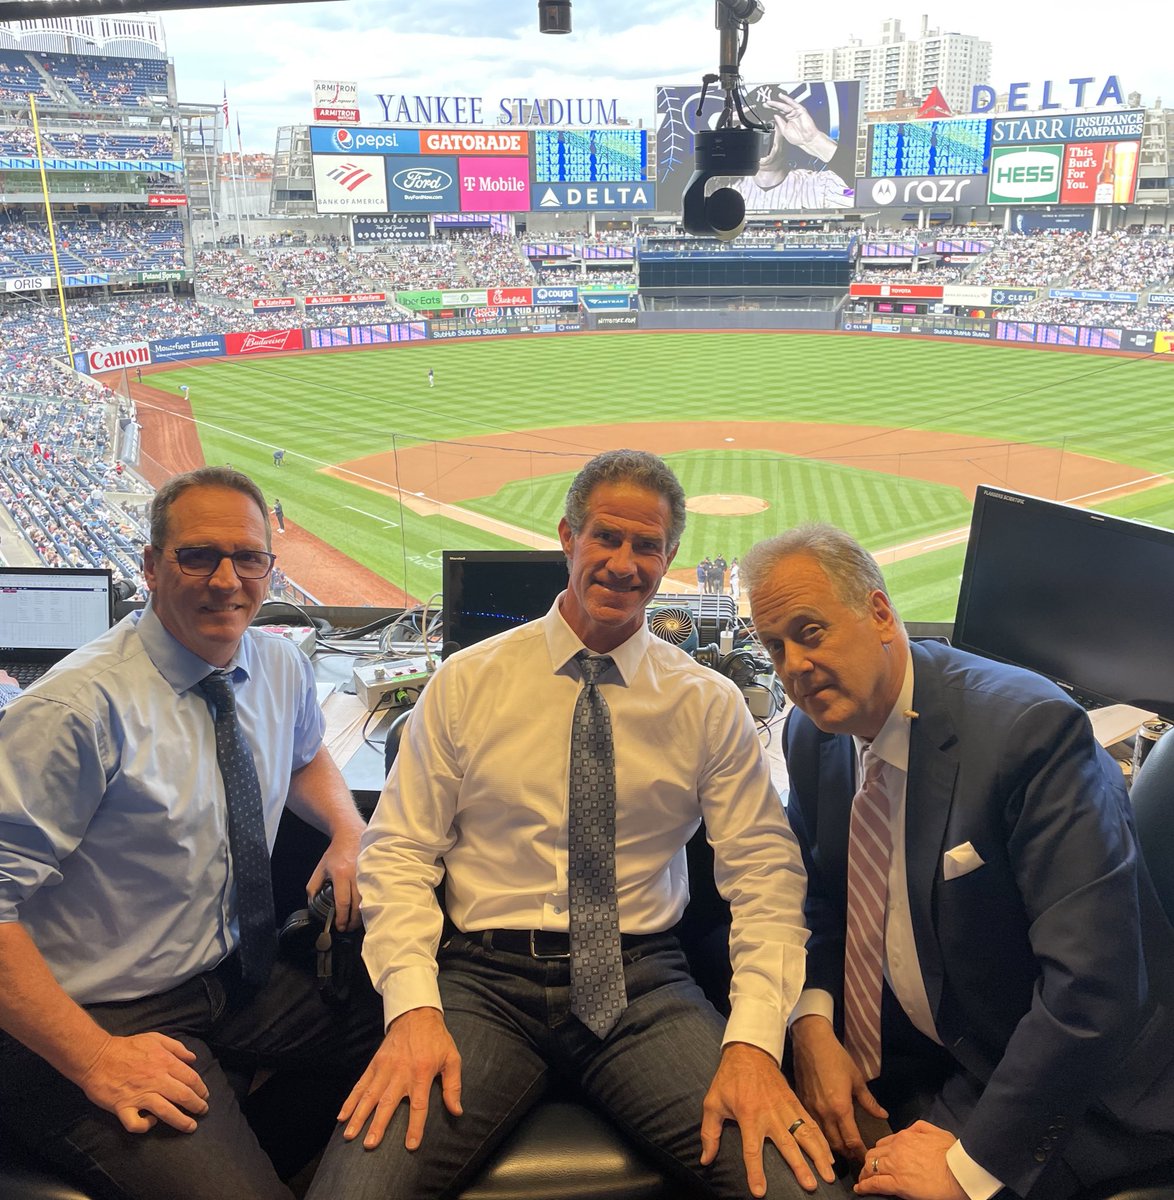 Will Paul O'Neill return to YES Network booth for Yankees games